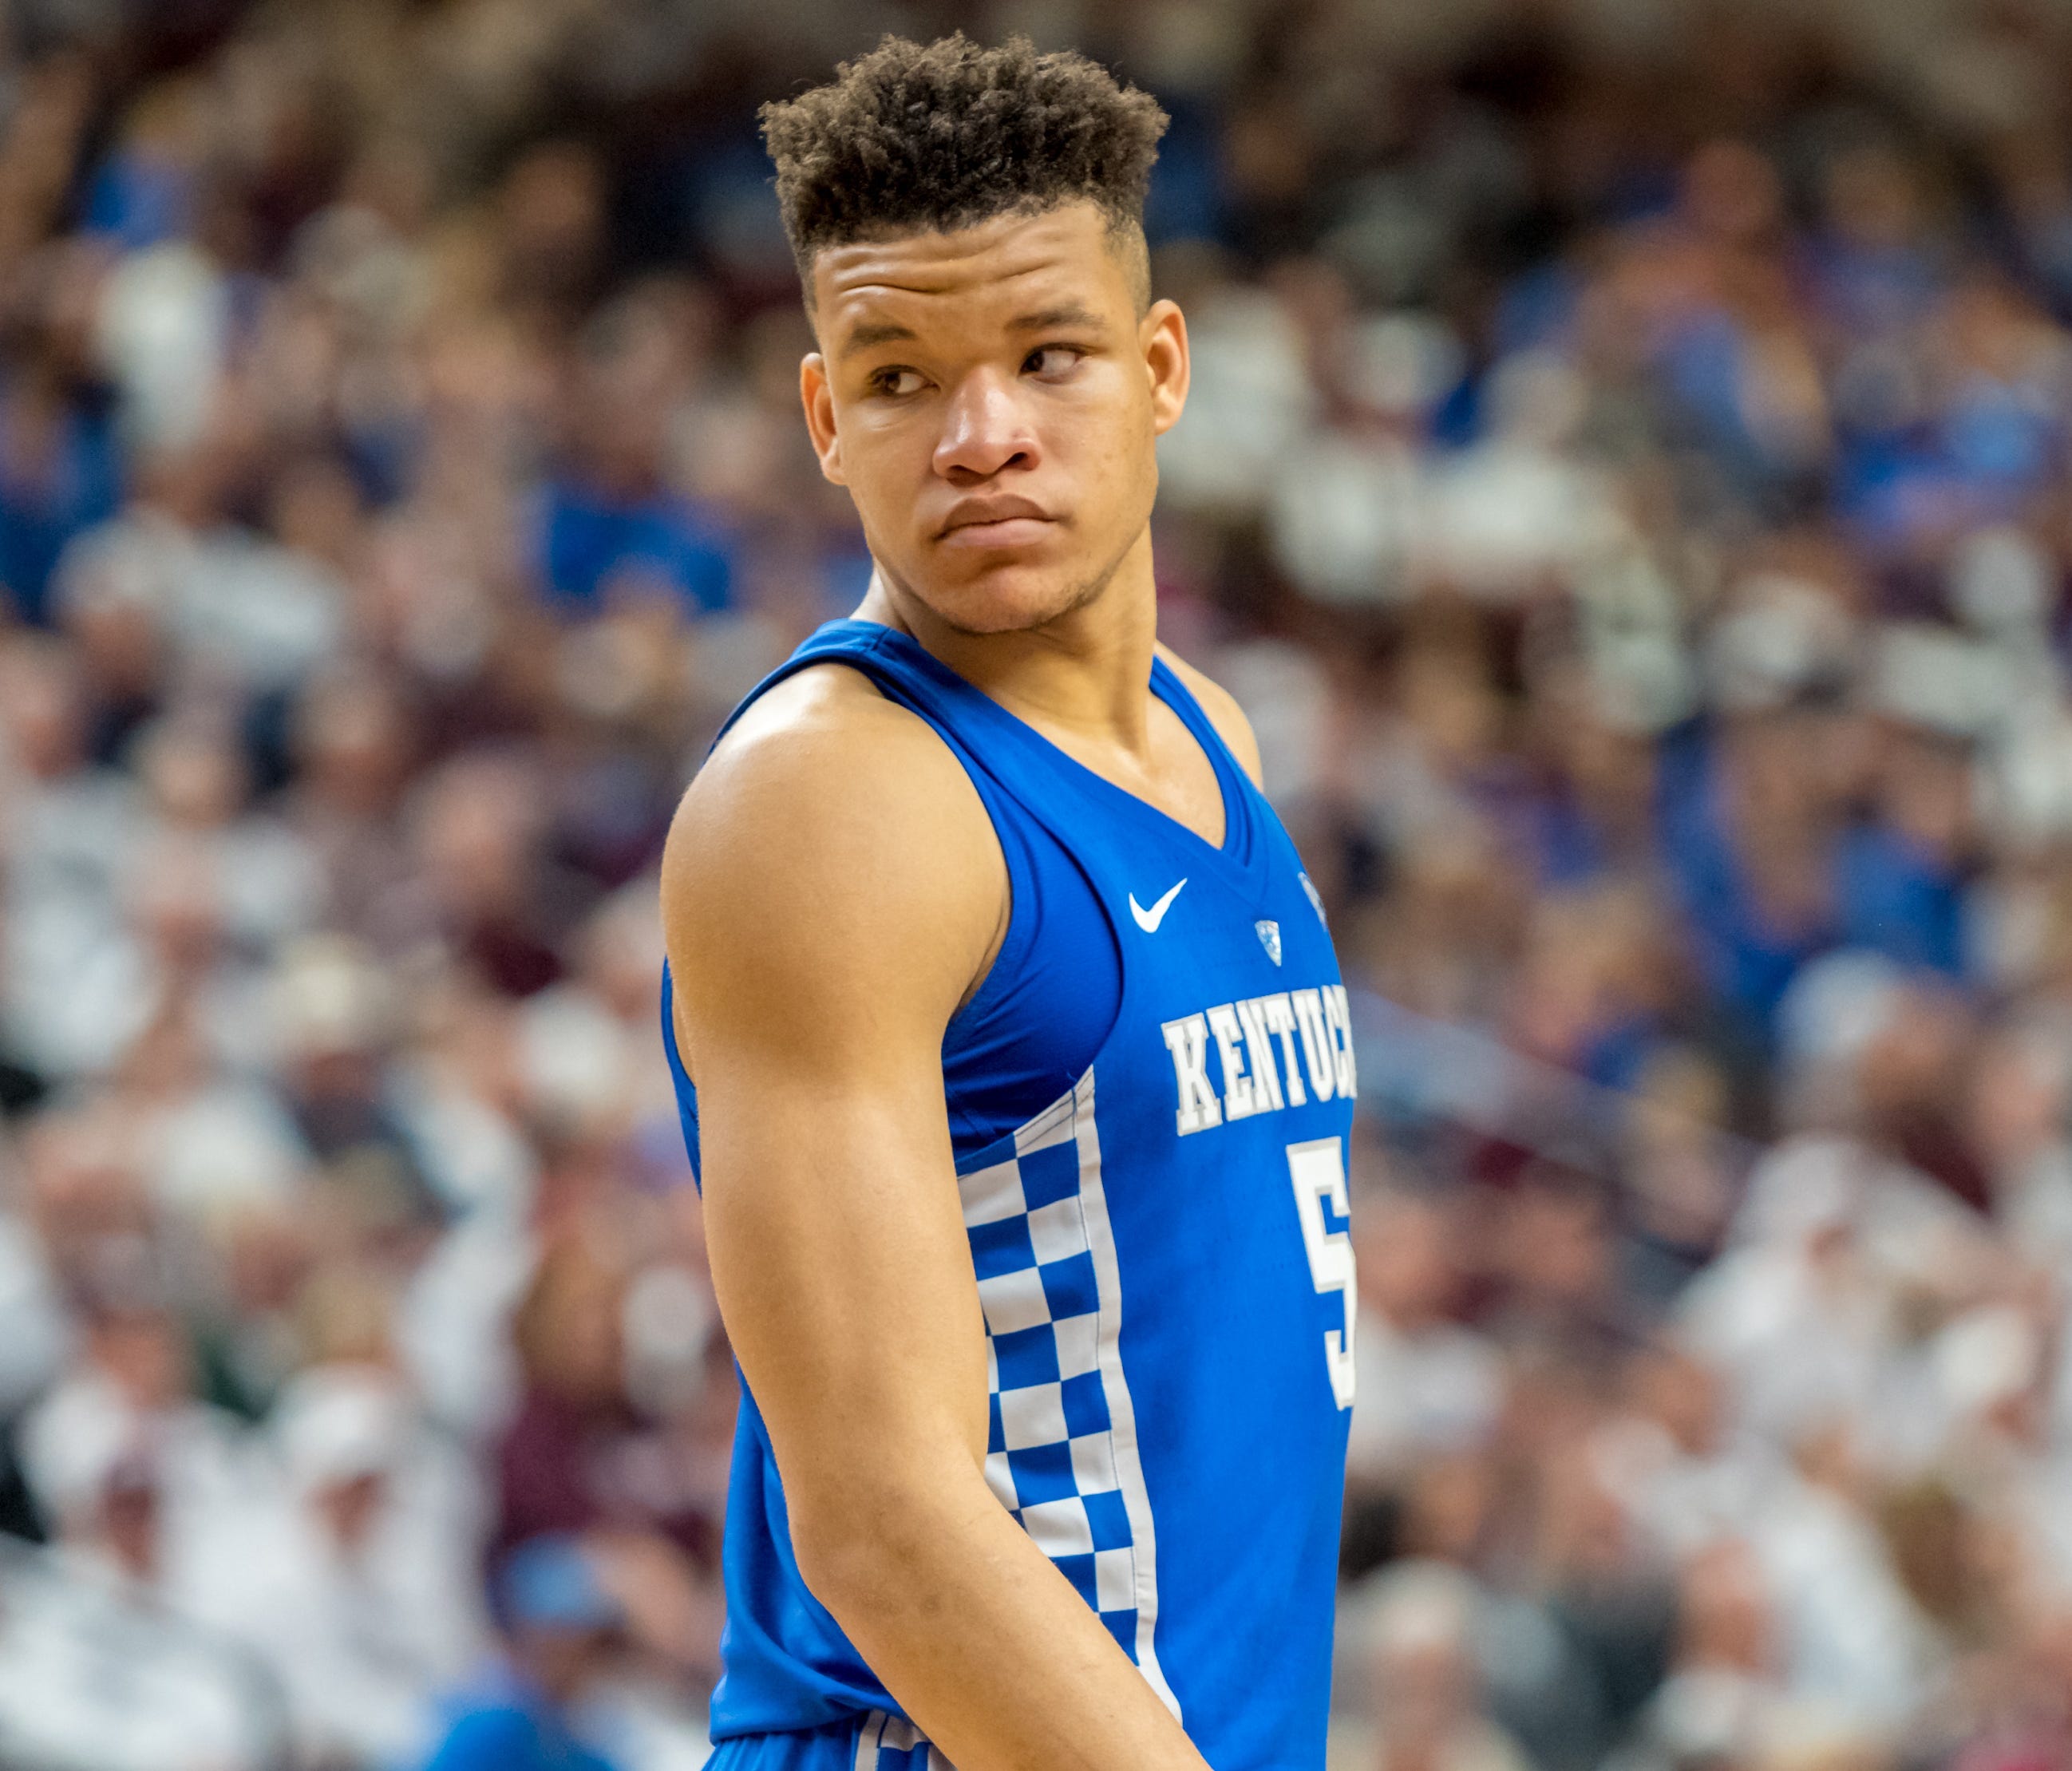 Kentucky Wildcats forward Kevin Knox looks on during the second half against the Texas A&M Aggies.